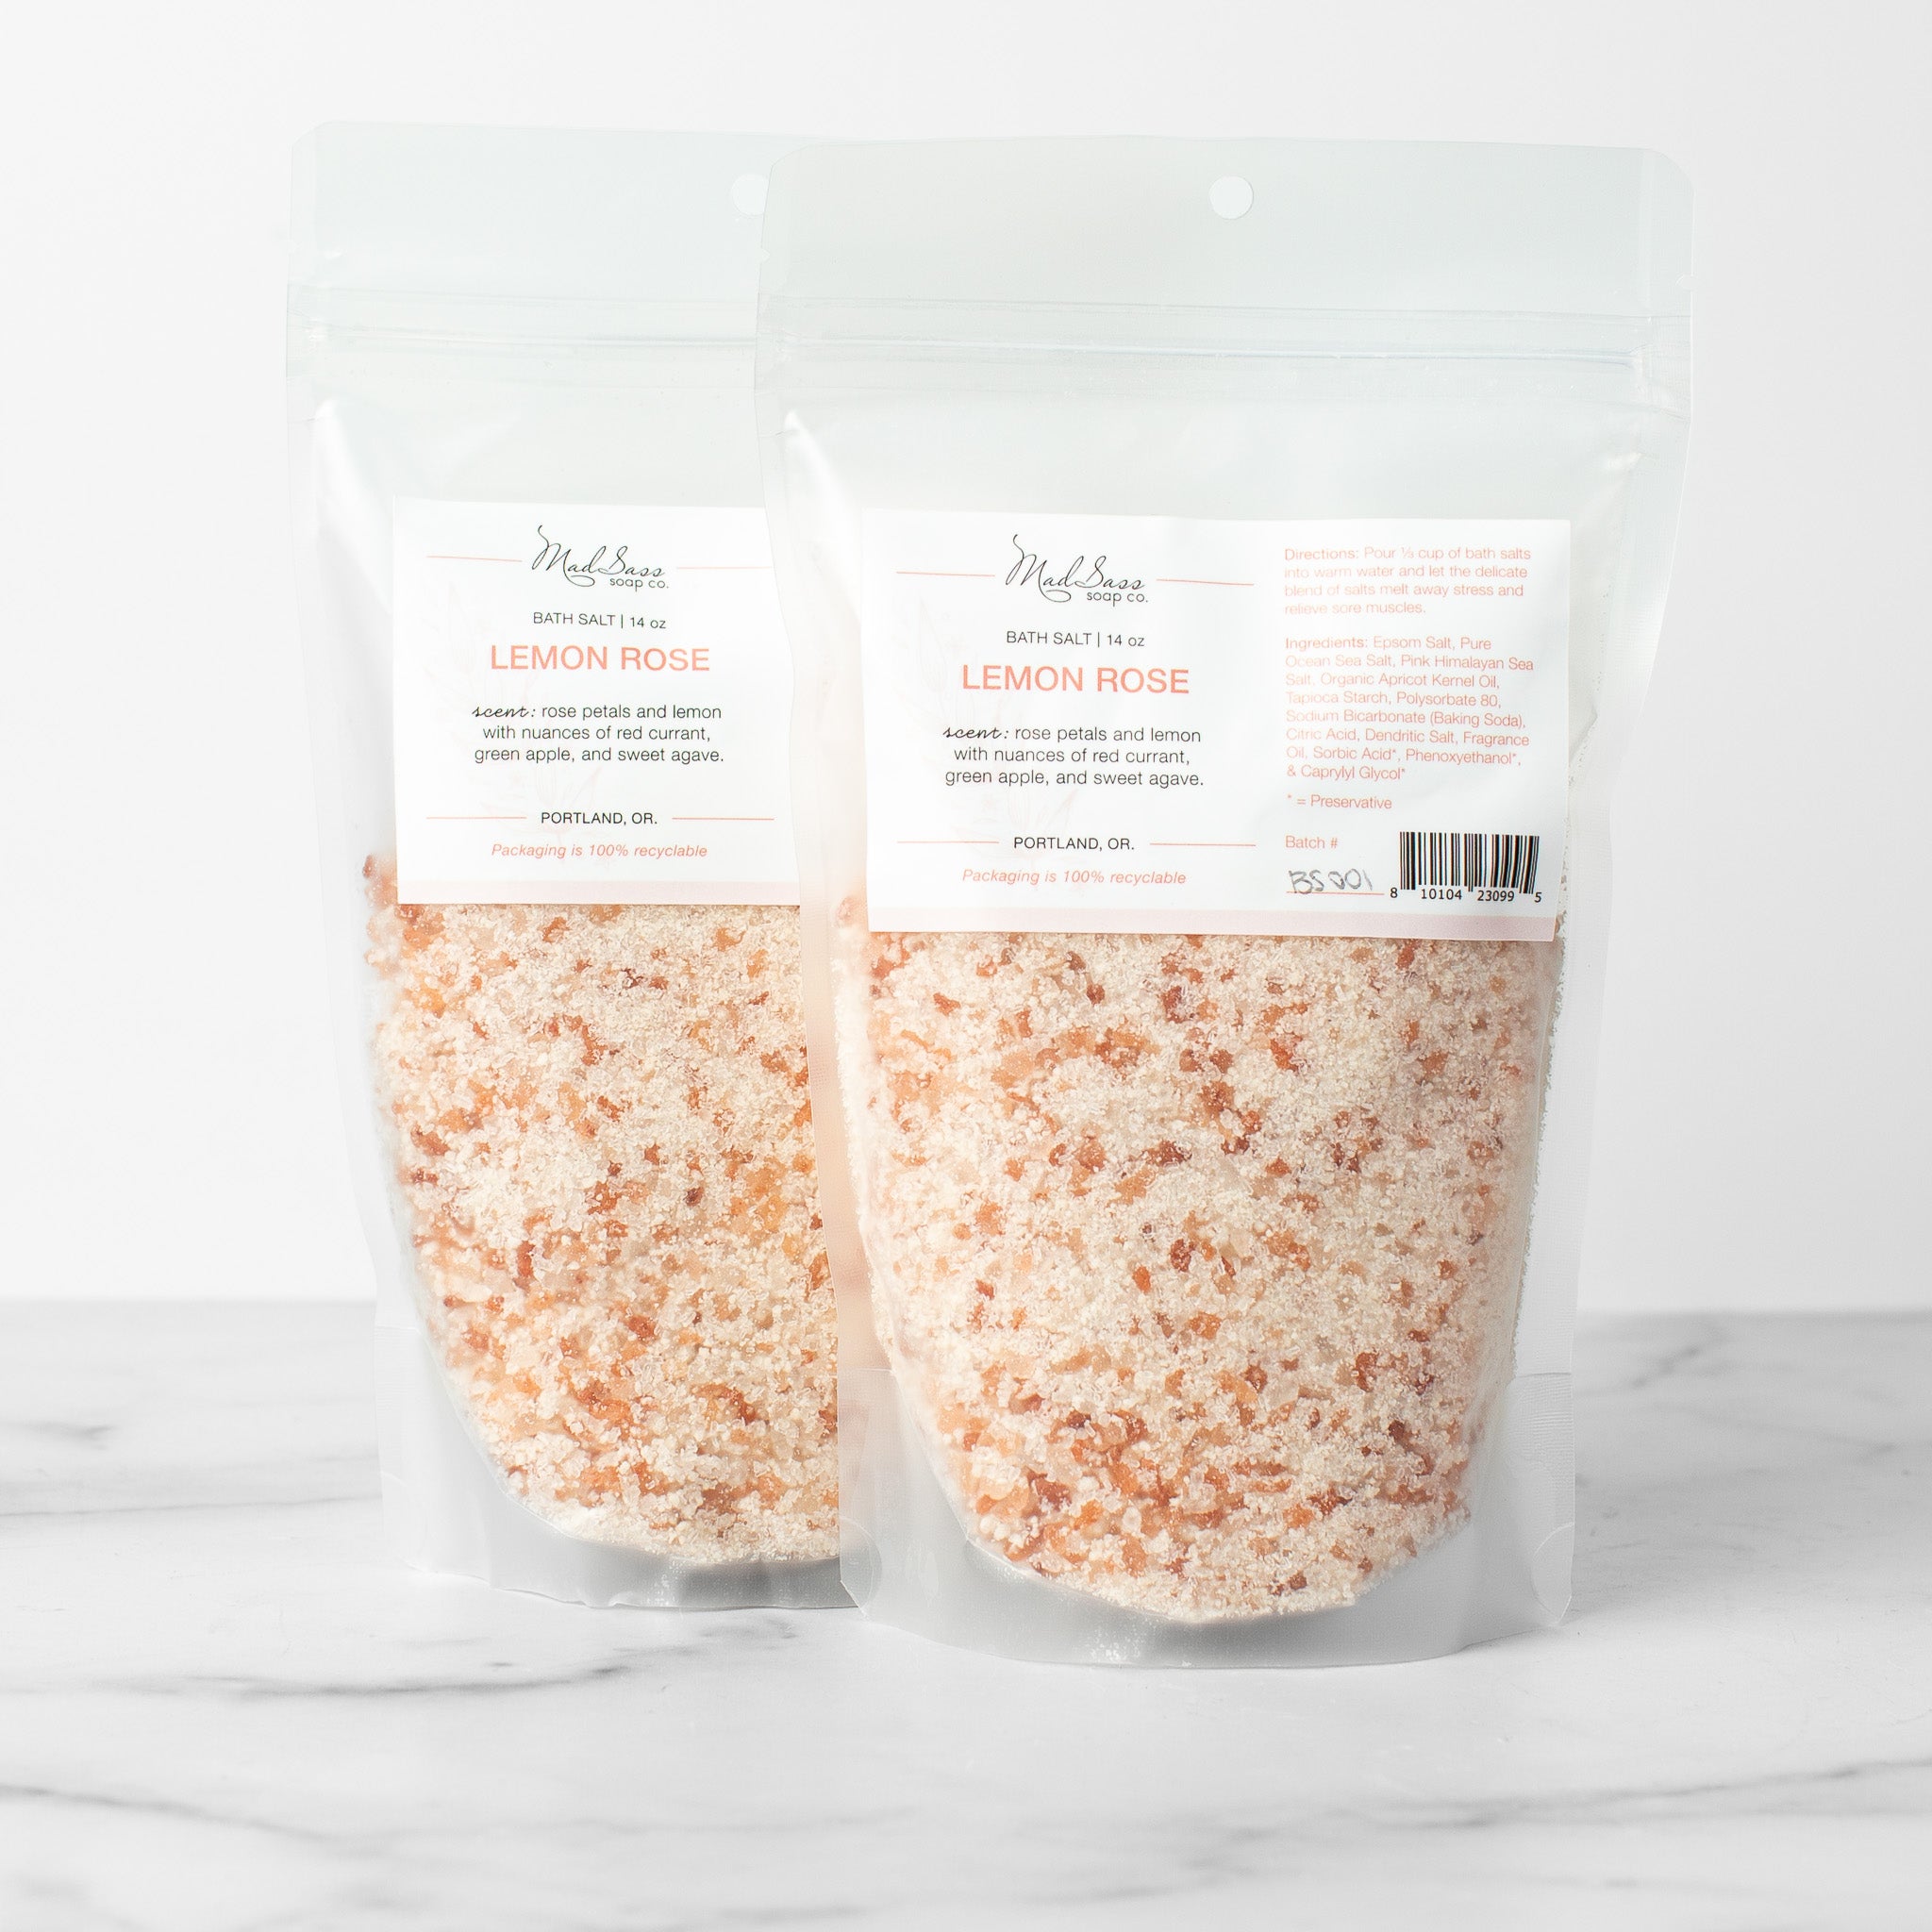 Two bags of Lemon Rose bath salts on a white background. Lemon Rose is a mixed pink and dark pink bath salt.